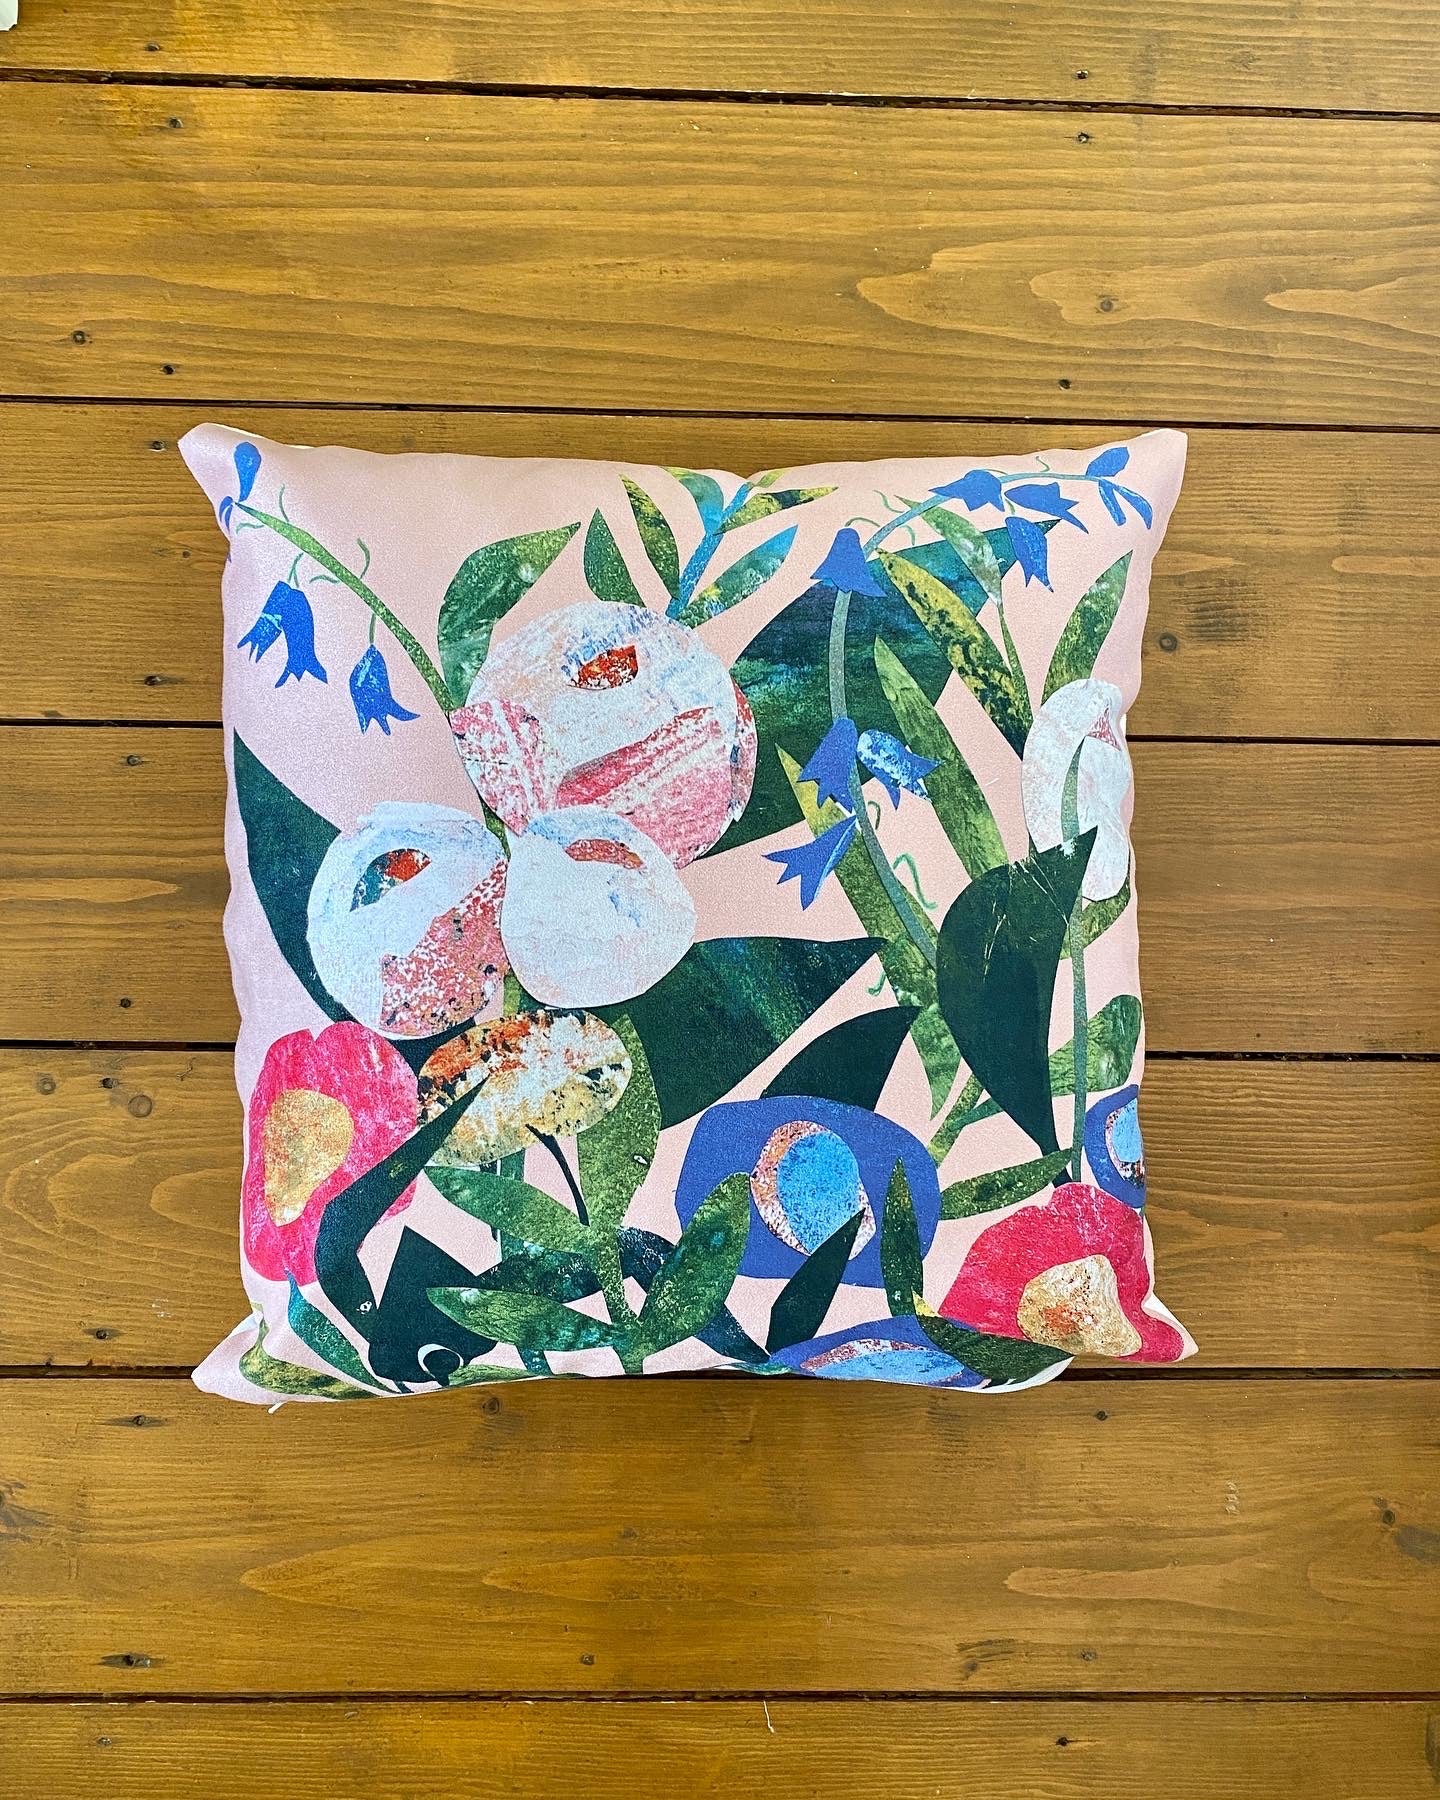 Spring Picks Pink Square Cushion Cover